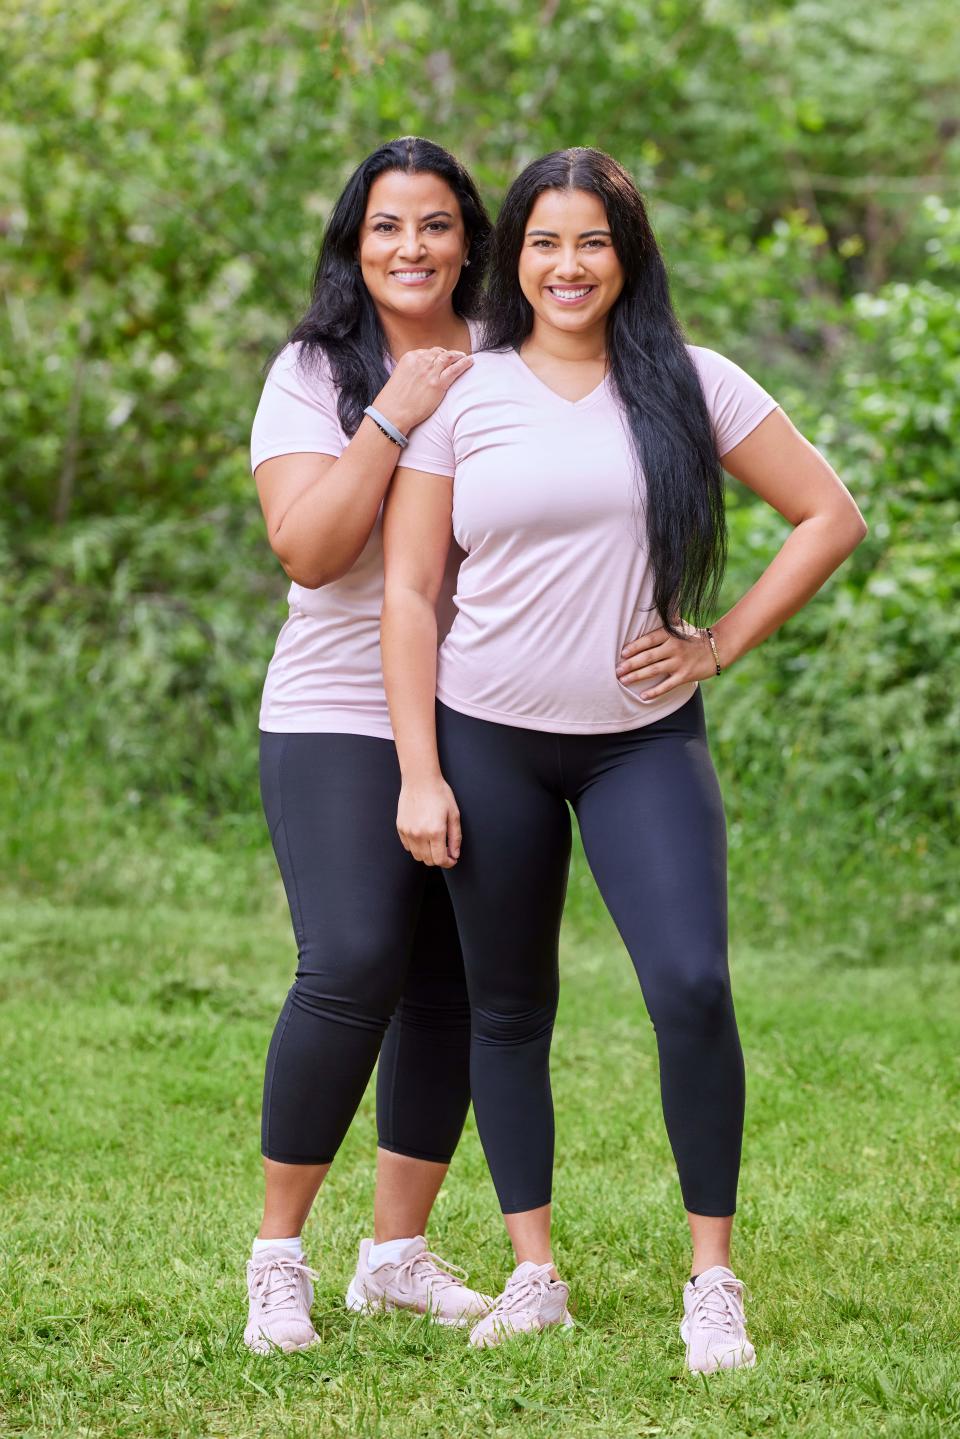 Mother/daughter duo Elizabeth and Iliana Rivera will compete in Season 35 of "The Amazing Race."